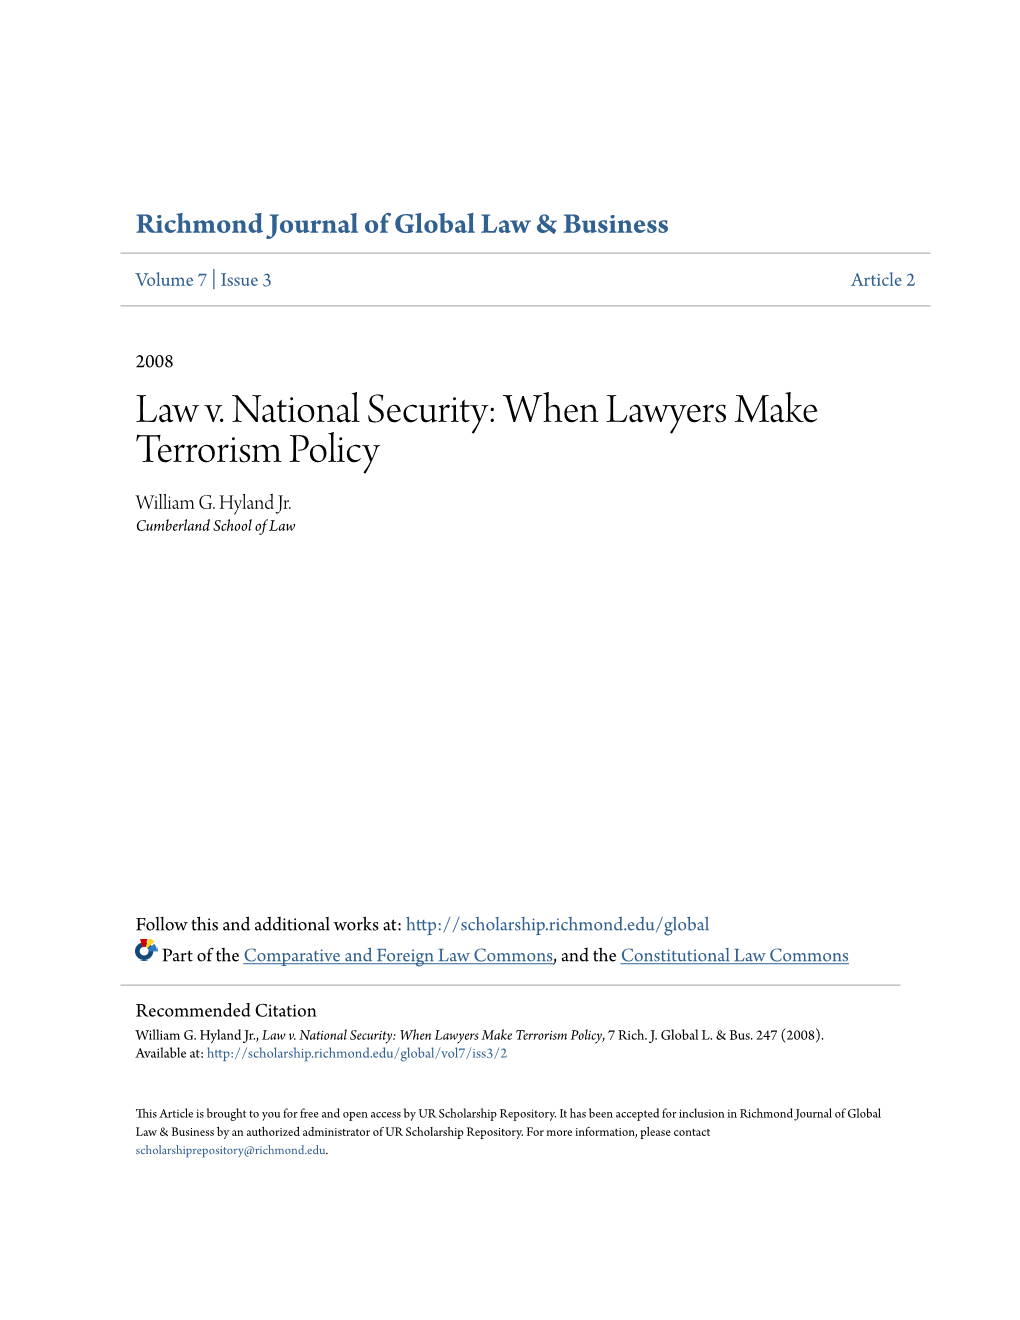 When Lawyers Make Terrorism Policy William G